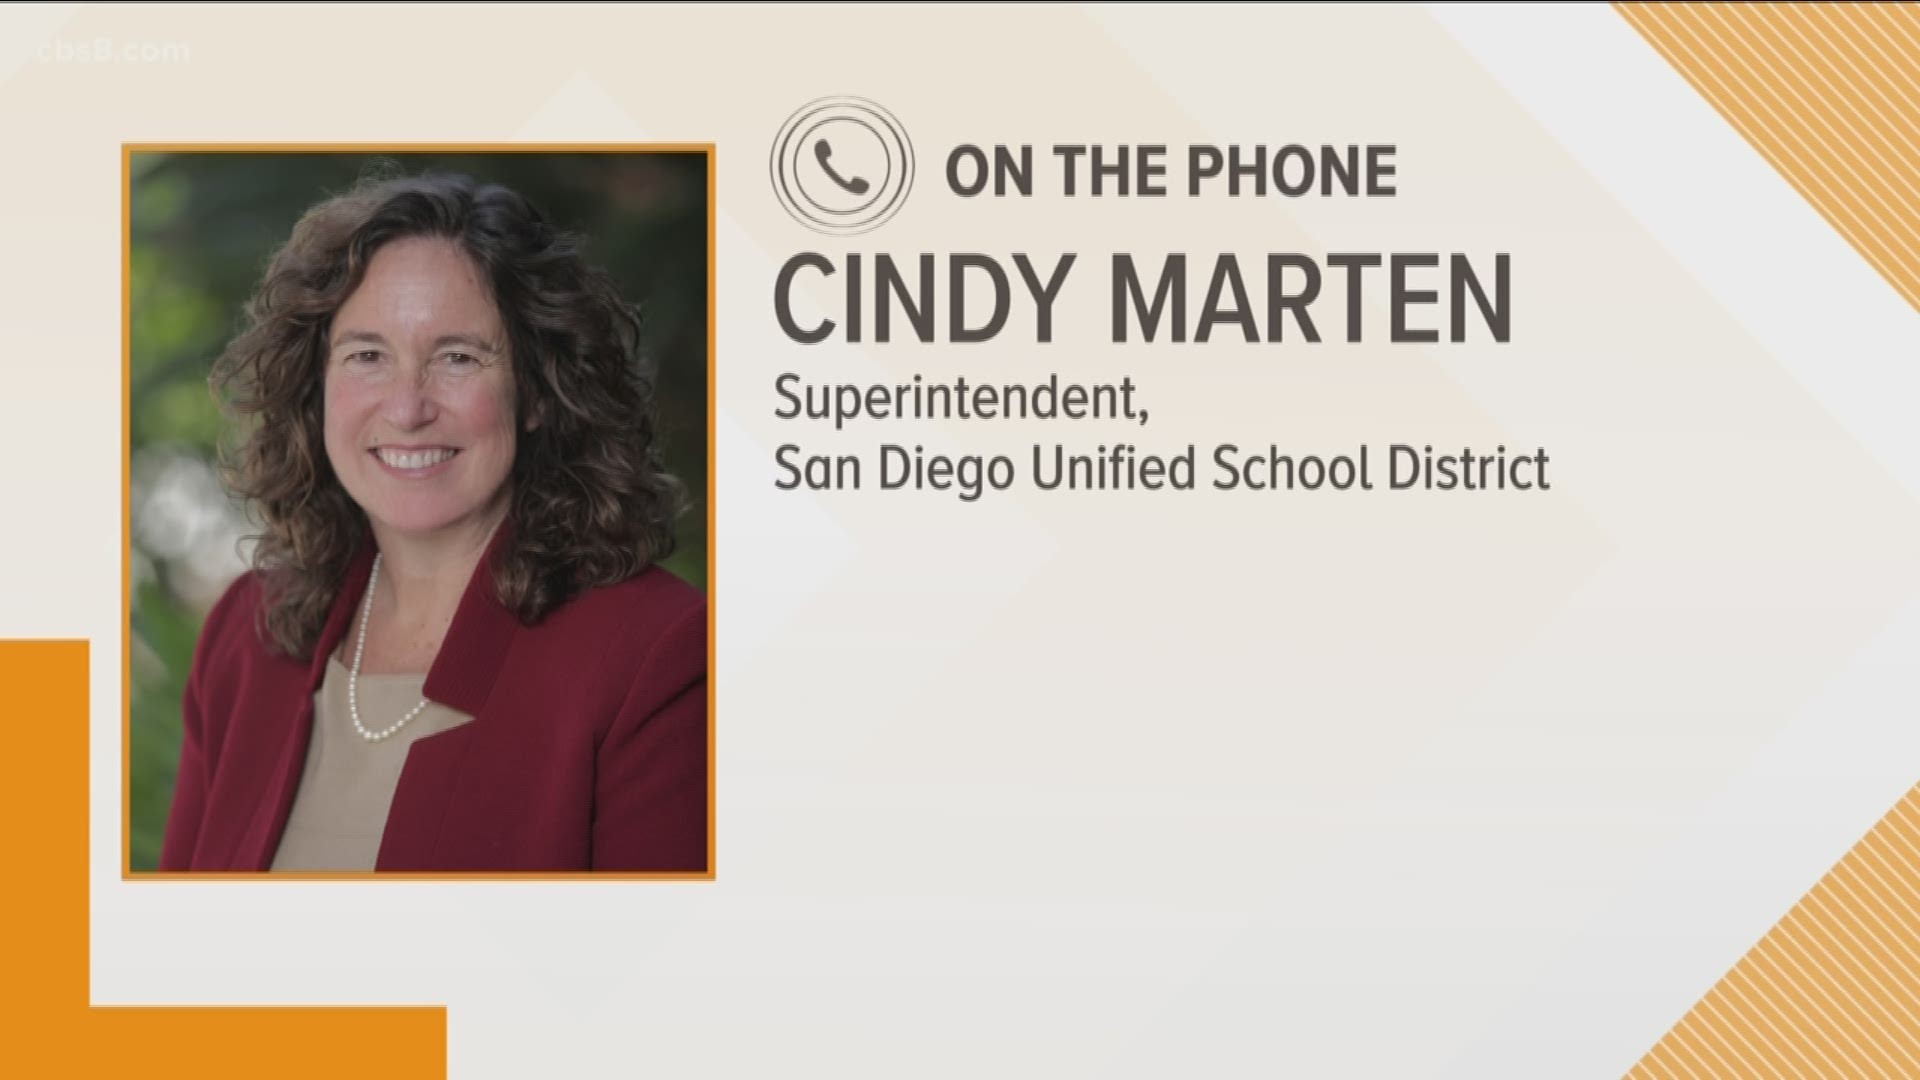 Cindy Marten joined Morning Extra to talk about how students will be graded and how the district is gearing up for distance learning to start on April 24.